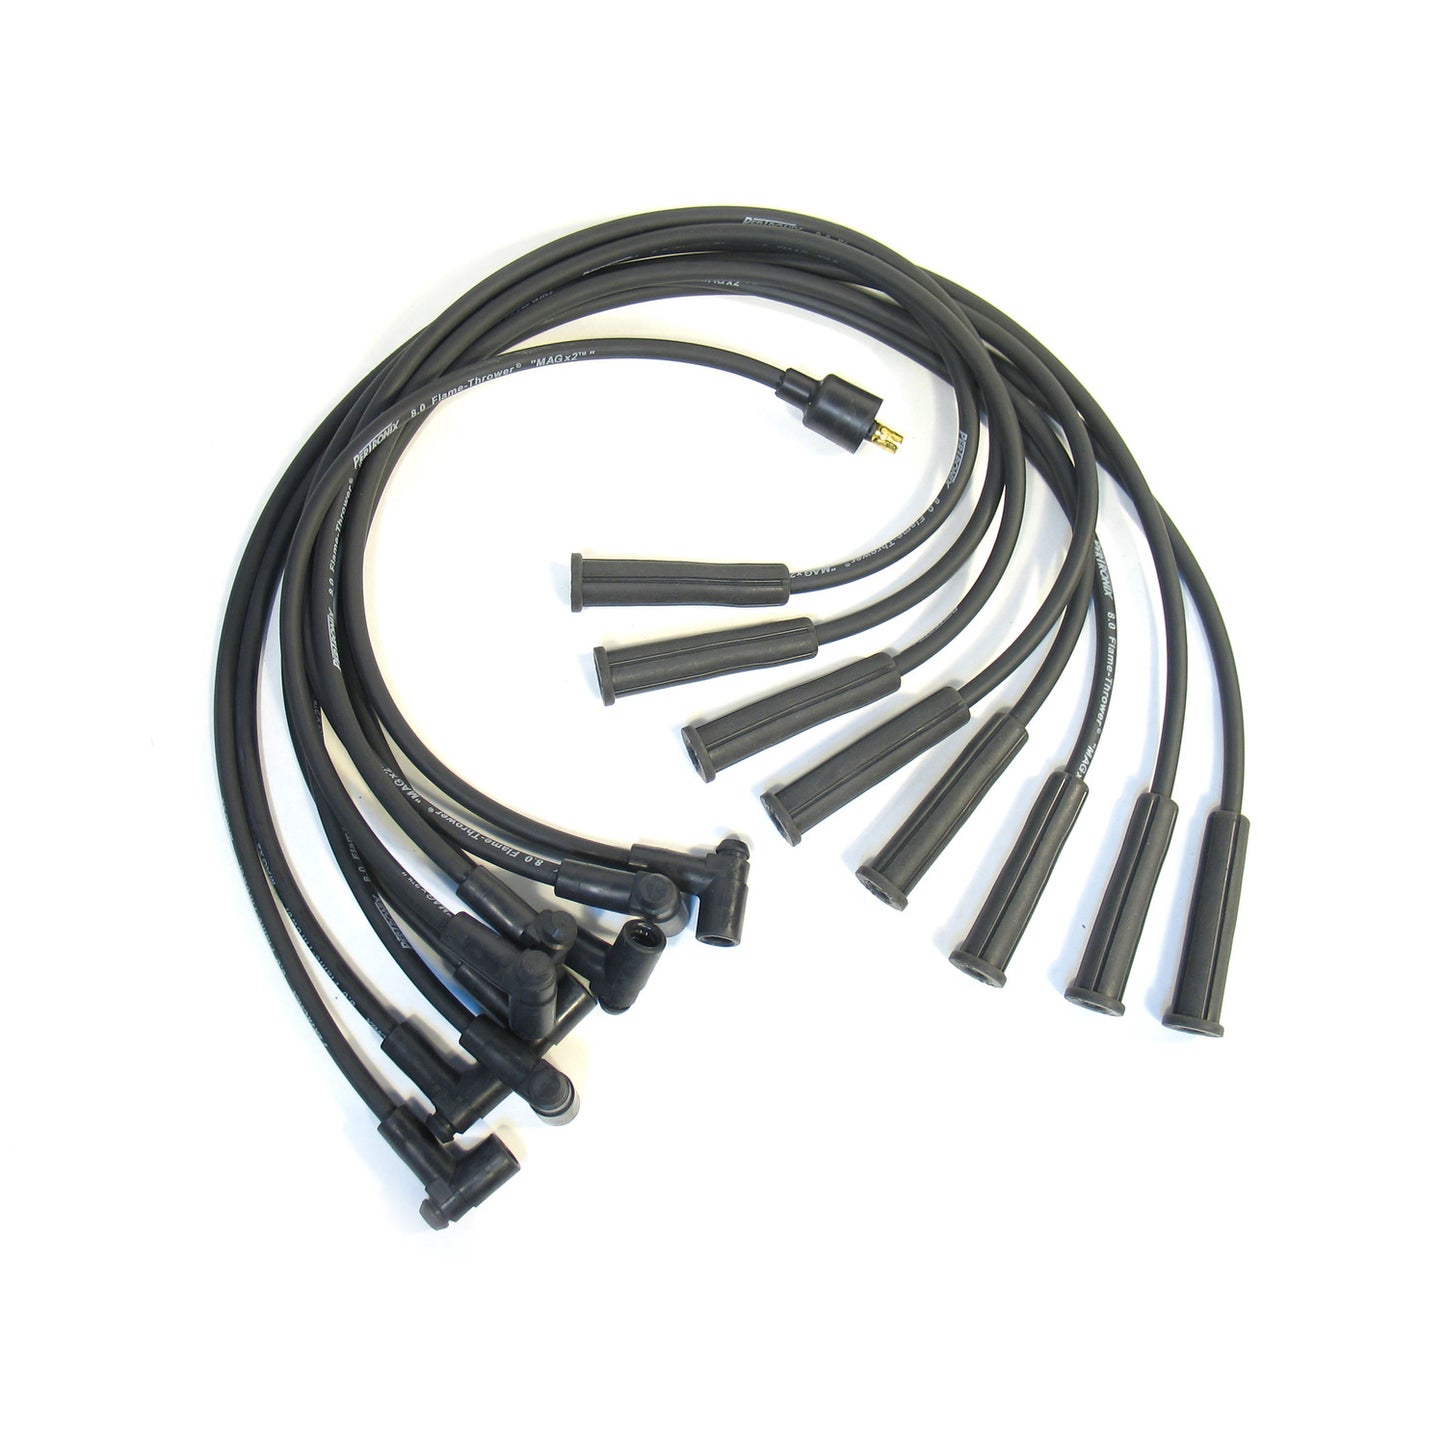 PerTronix 808220 Flame-Thrower Spark Plug Wires 8 cyl 8mm Ford 289-302W Male Cap Black